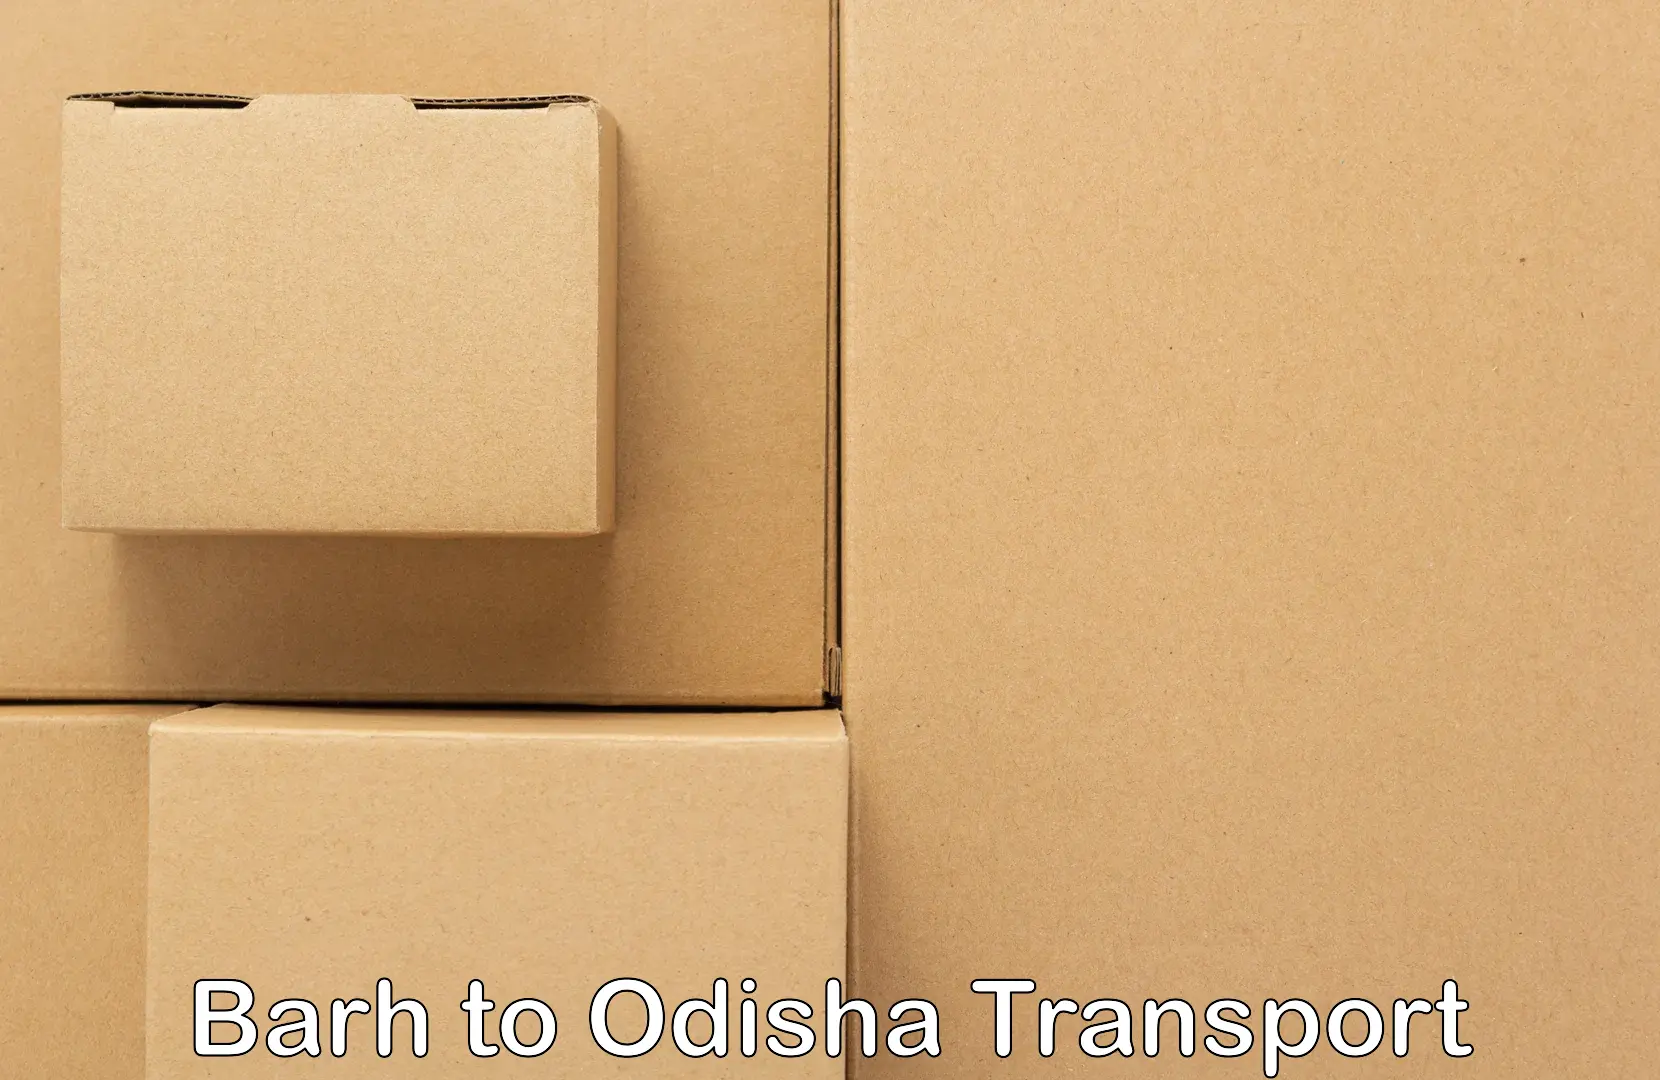 Online transport booking Barh to Paradip Port